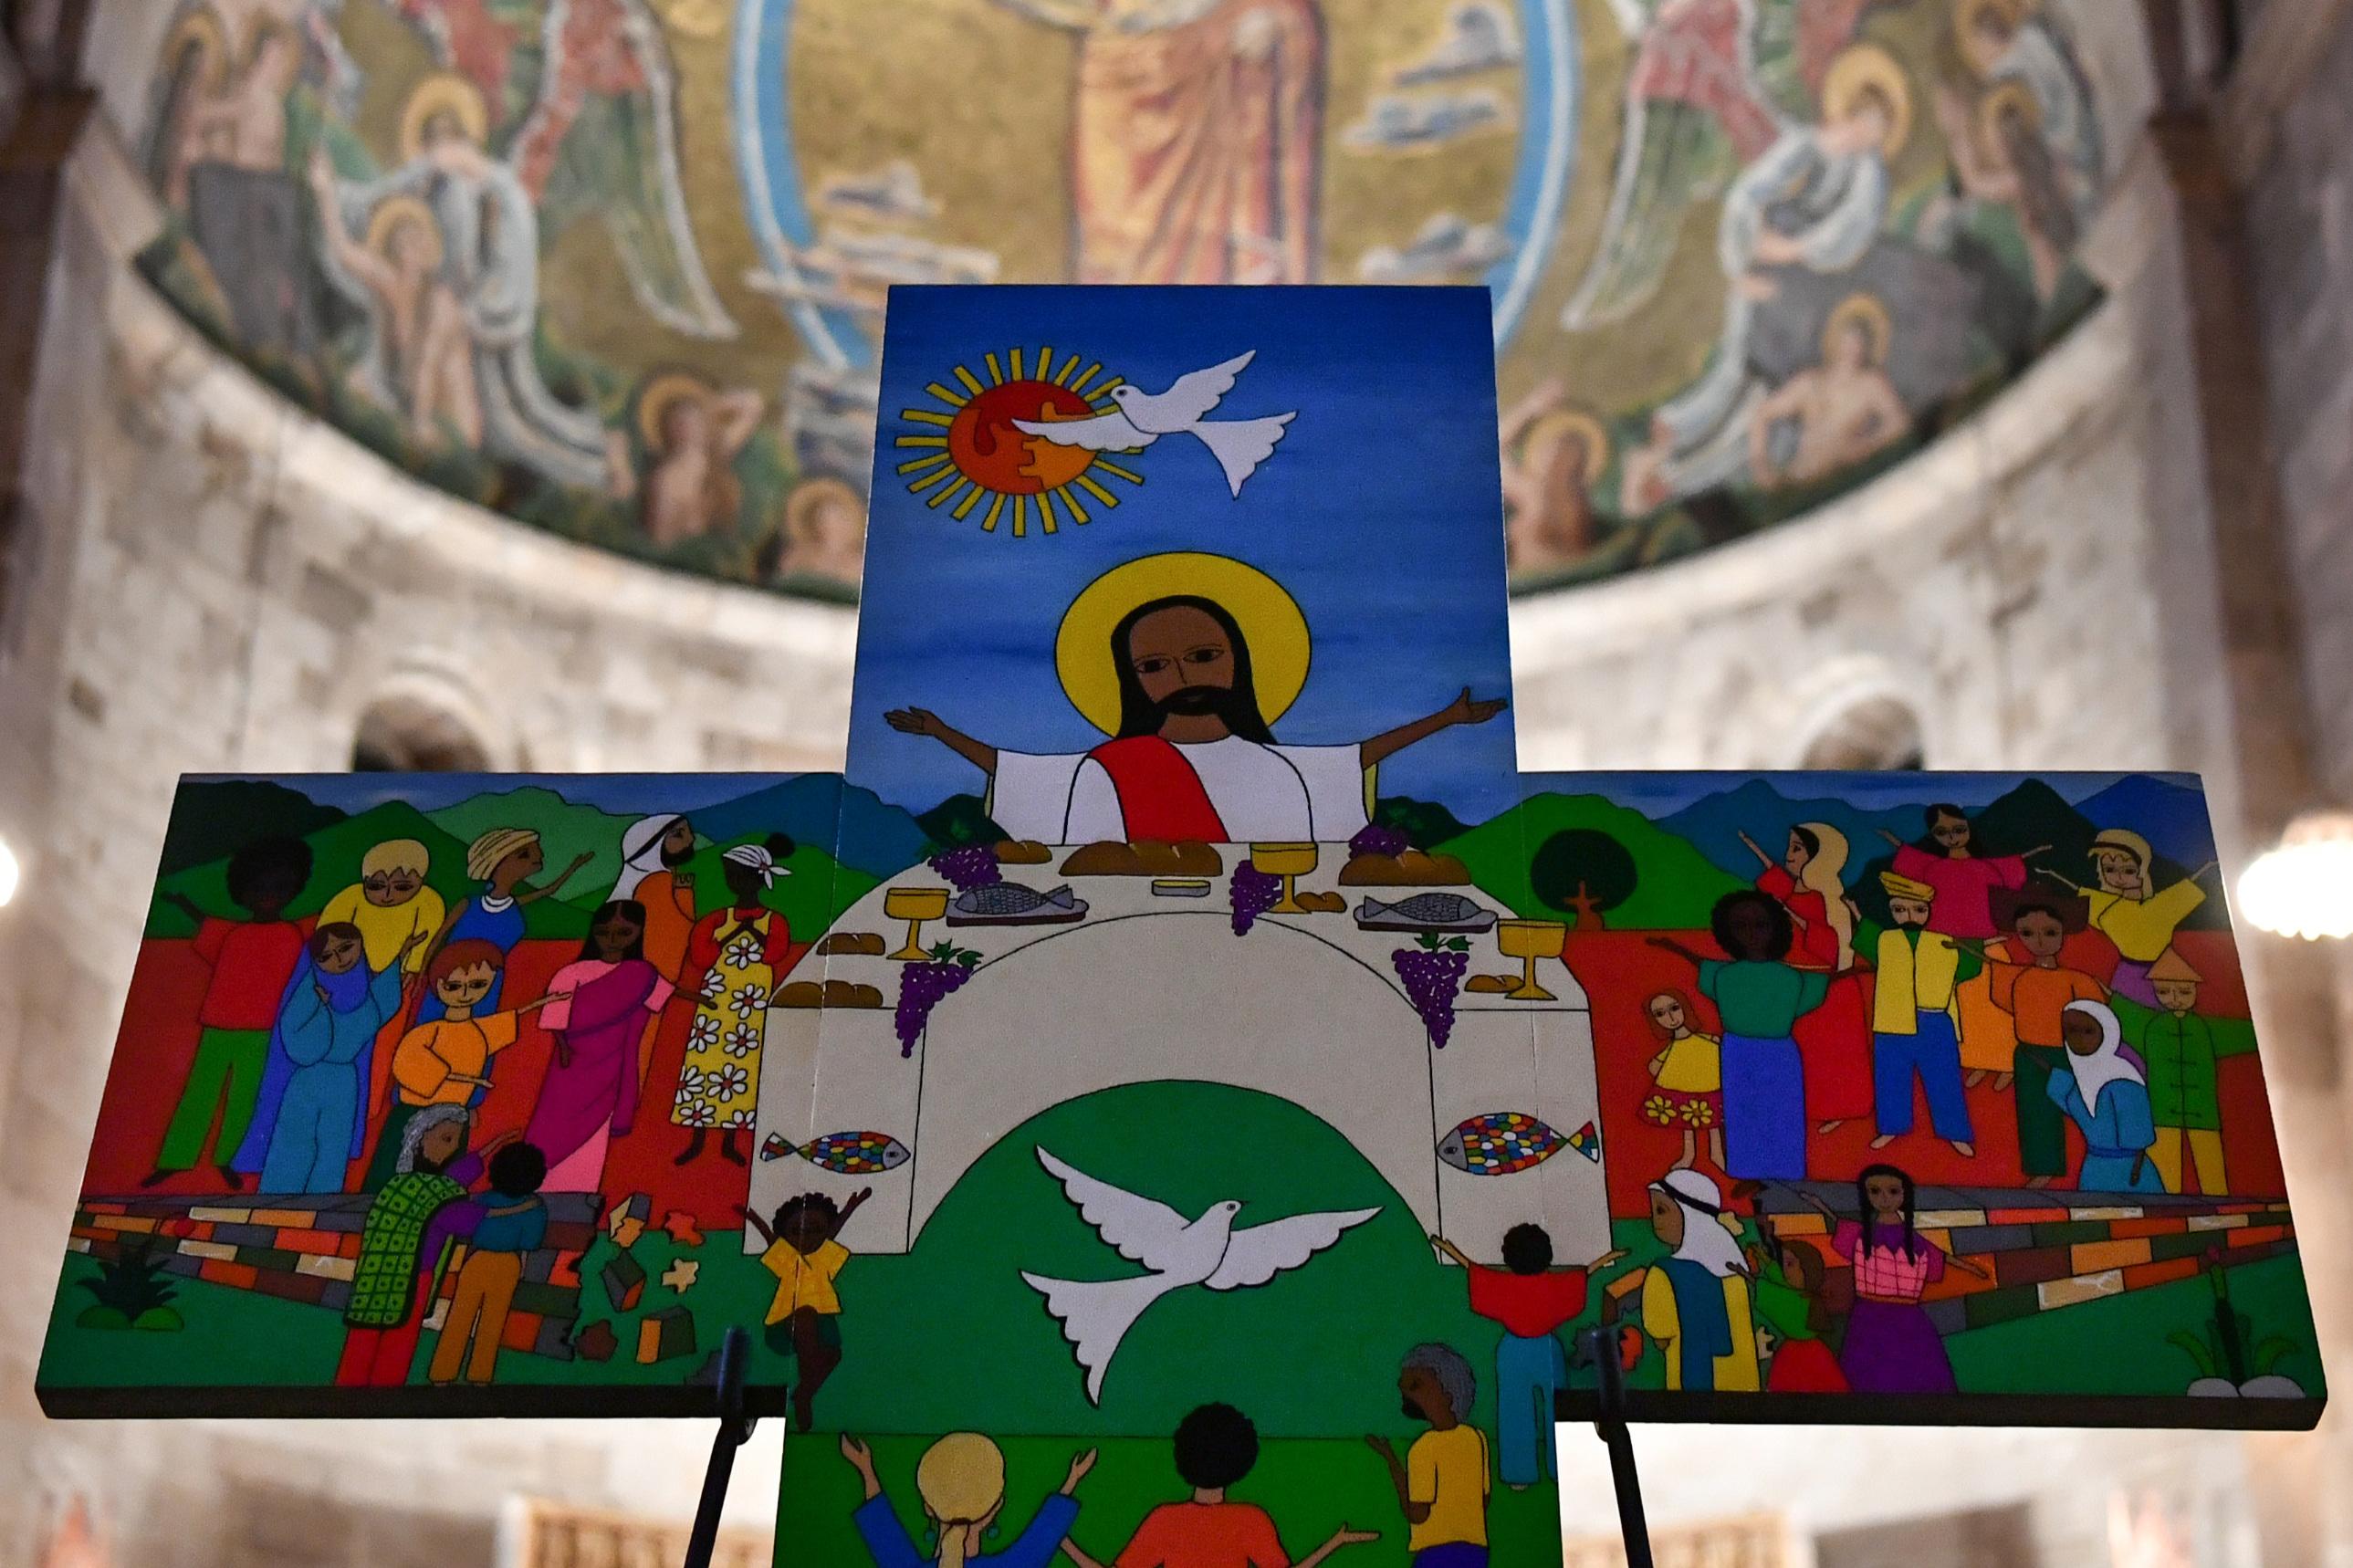 The Salvadoran cross painted for the joint ecumenical commemoration in Lund, Sweden will be at the center of the commemoration service in Namibia as well. Photo: LWF/ M. Renaux